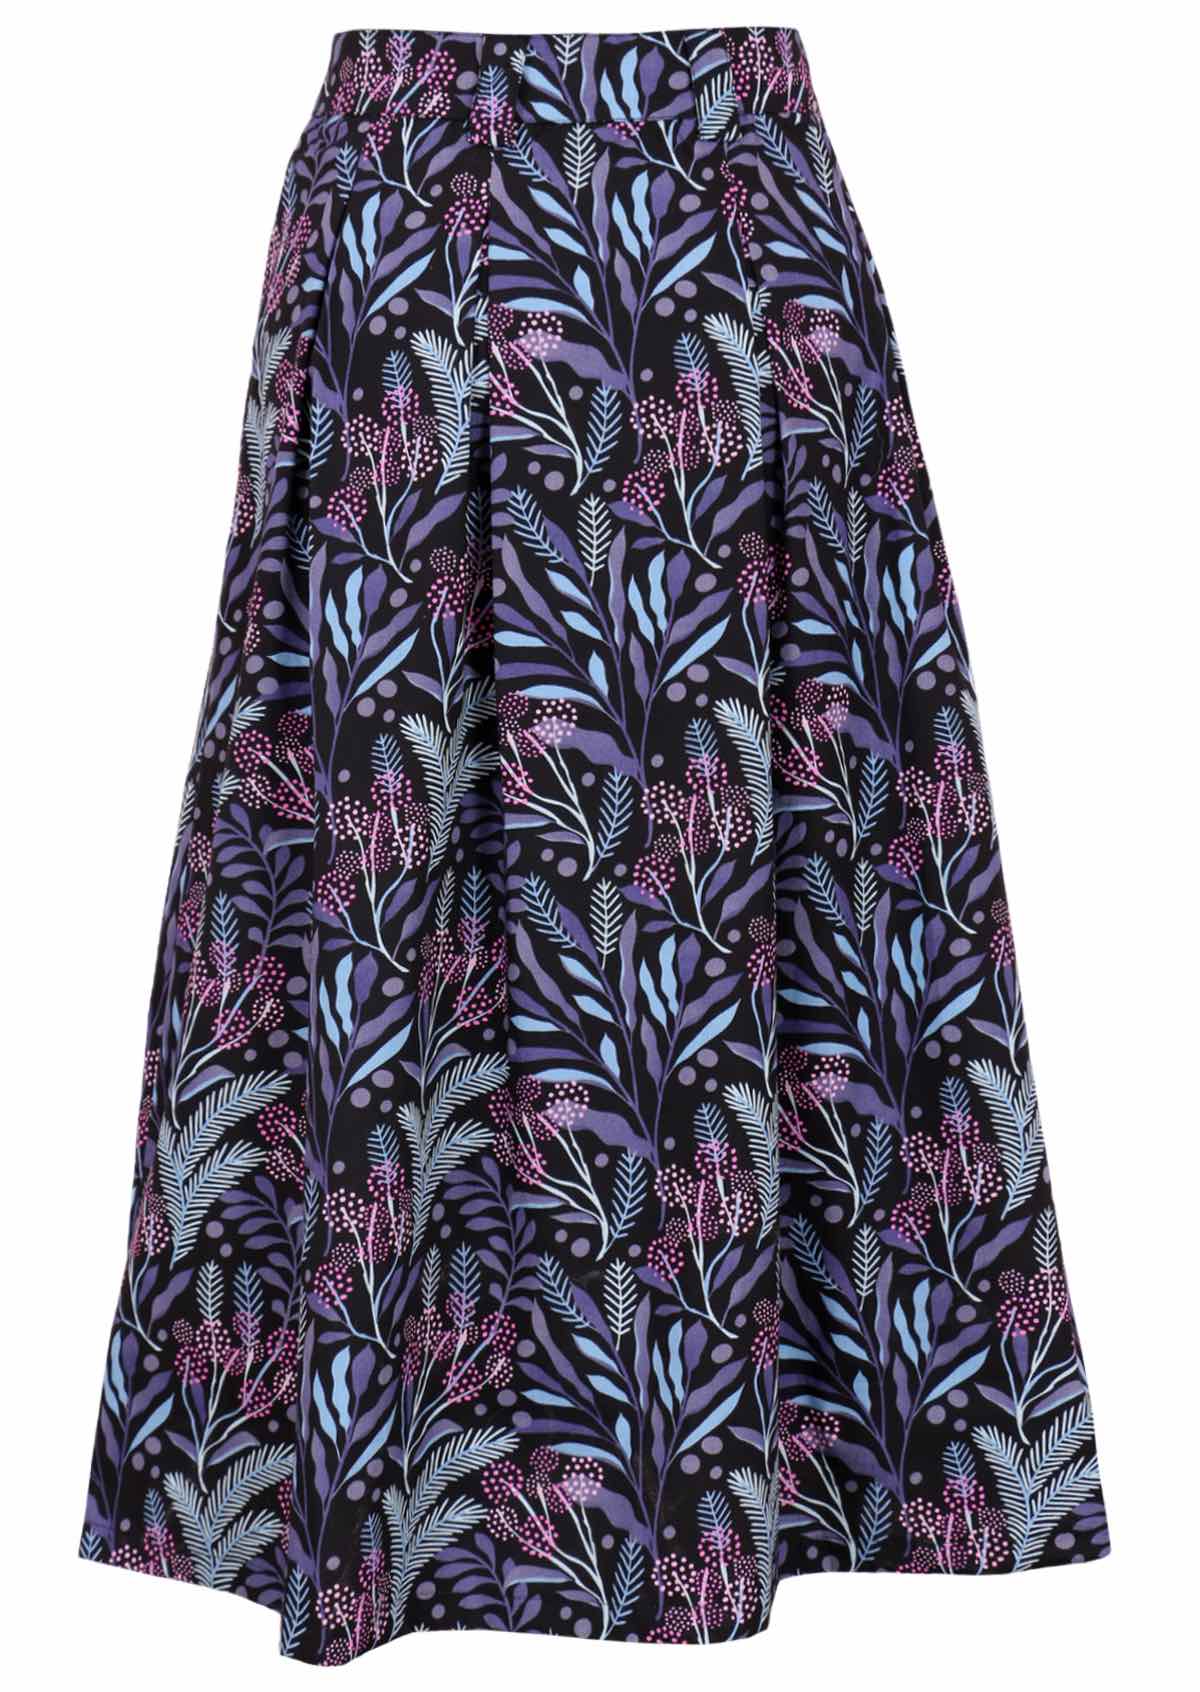 Generous A-line skirt with box pleats creates great shape